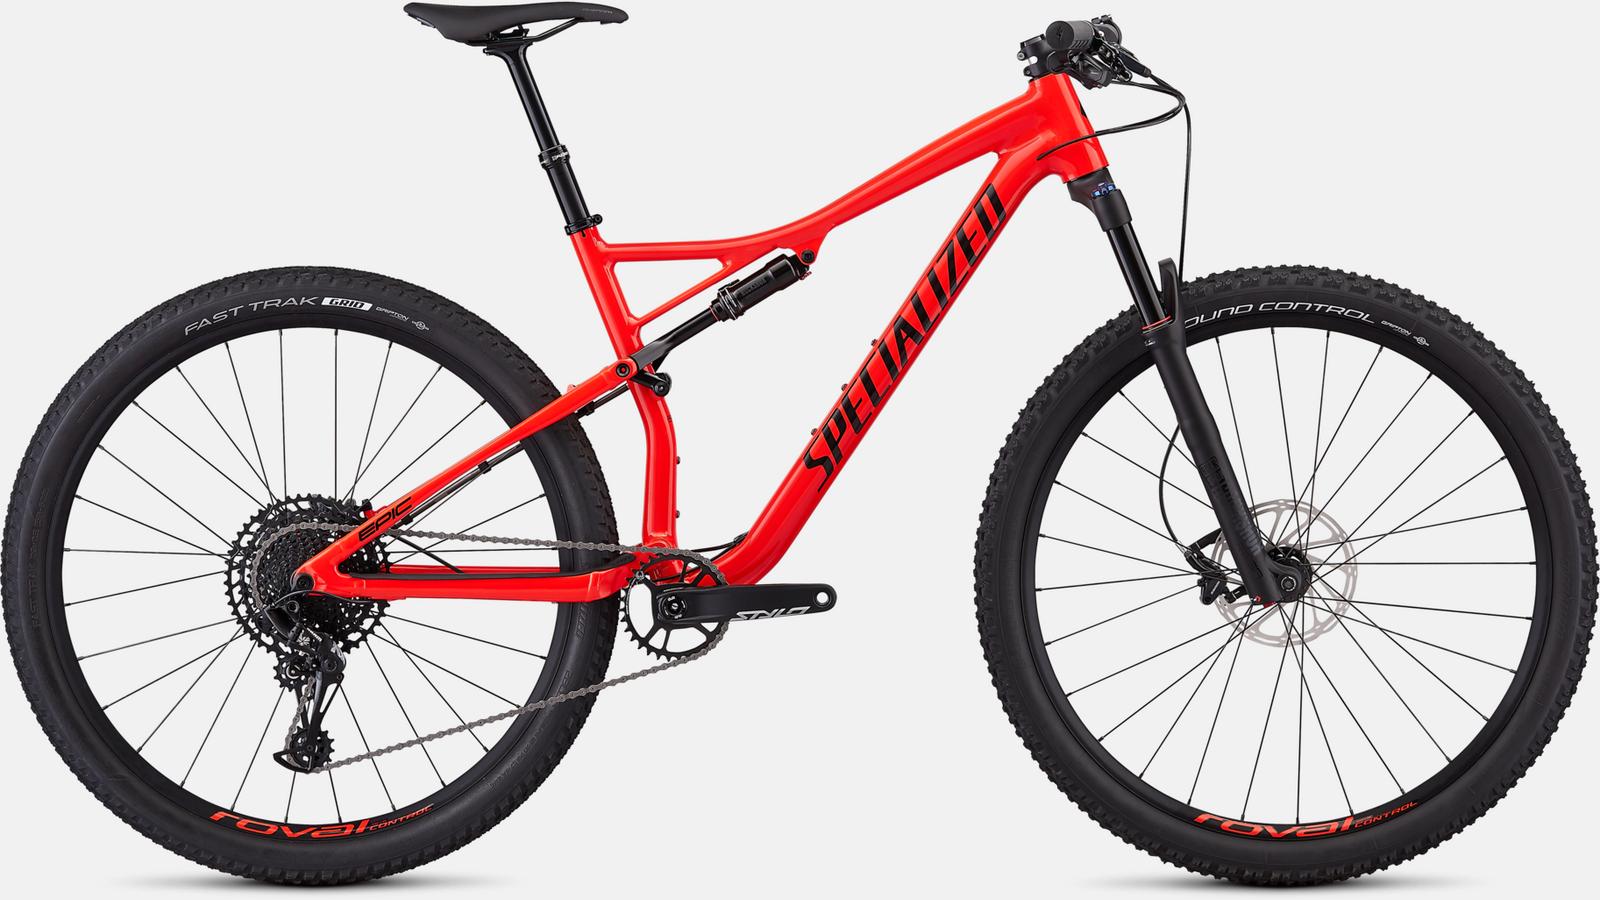 Paint for 2019 Specialized Epic Comp EVO - Gloss Rocket Red